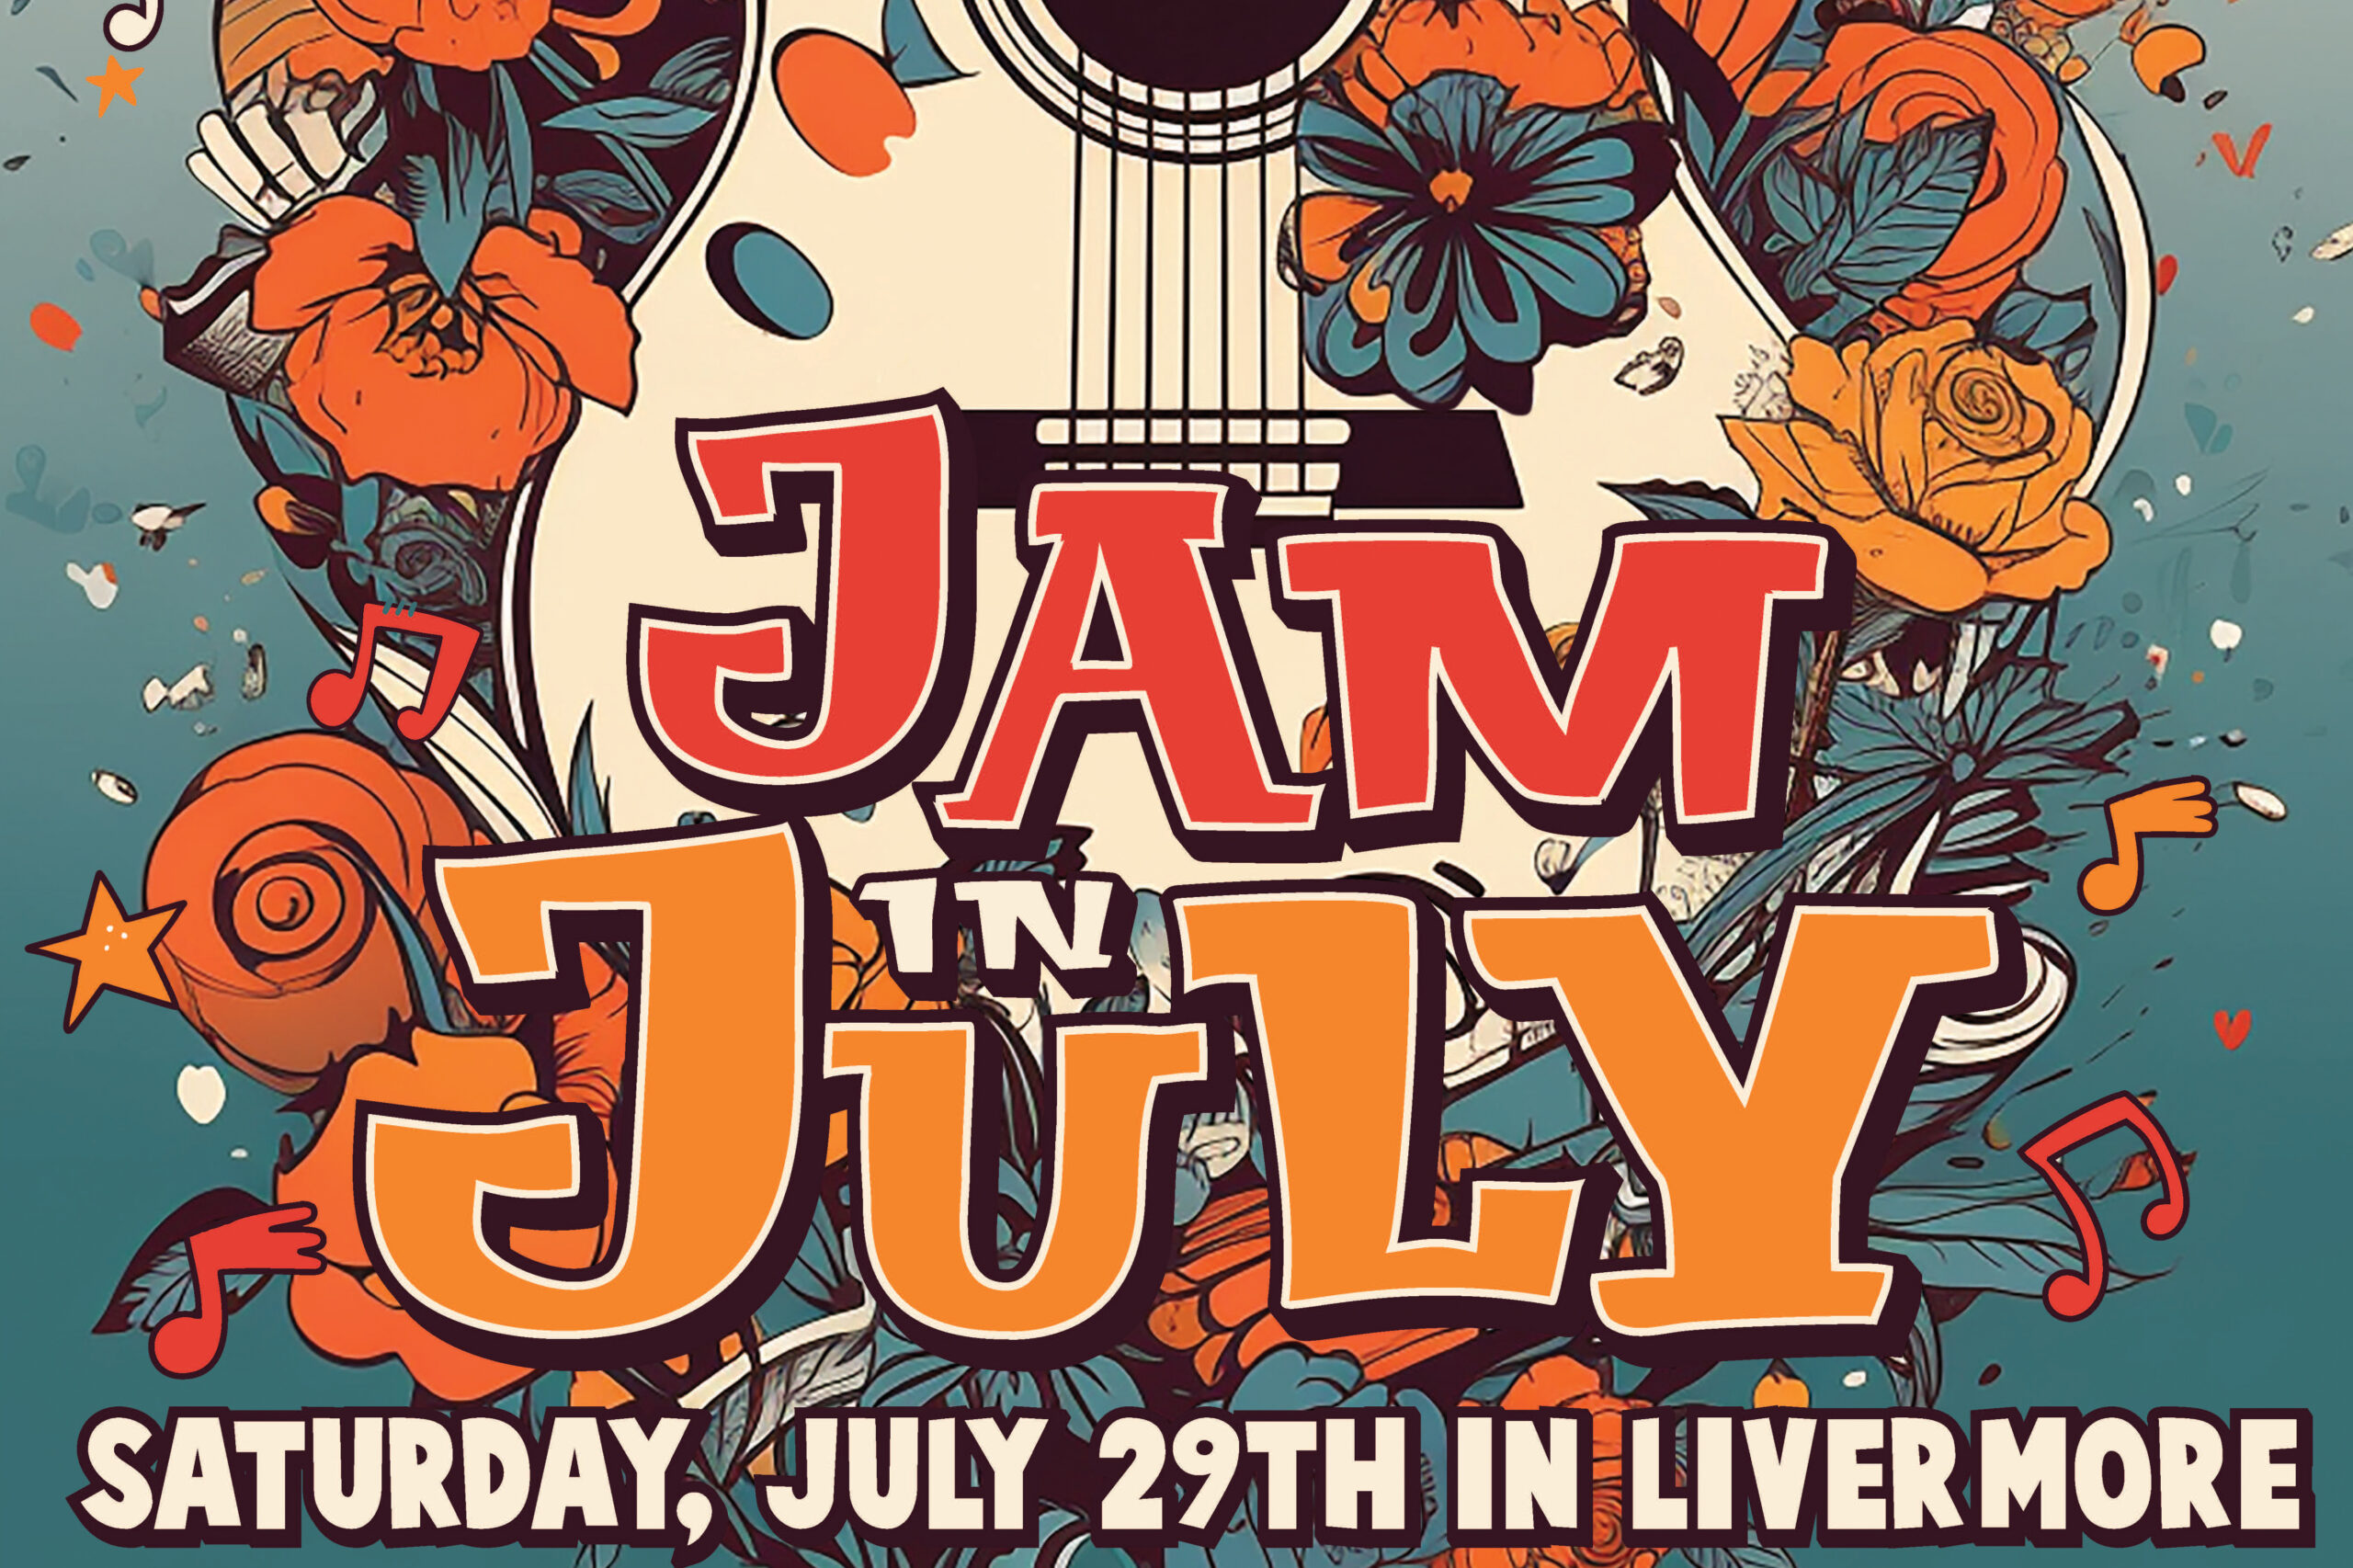 jam in july poster with guitar drawn in background